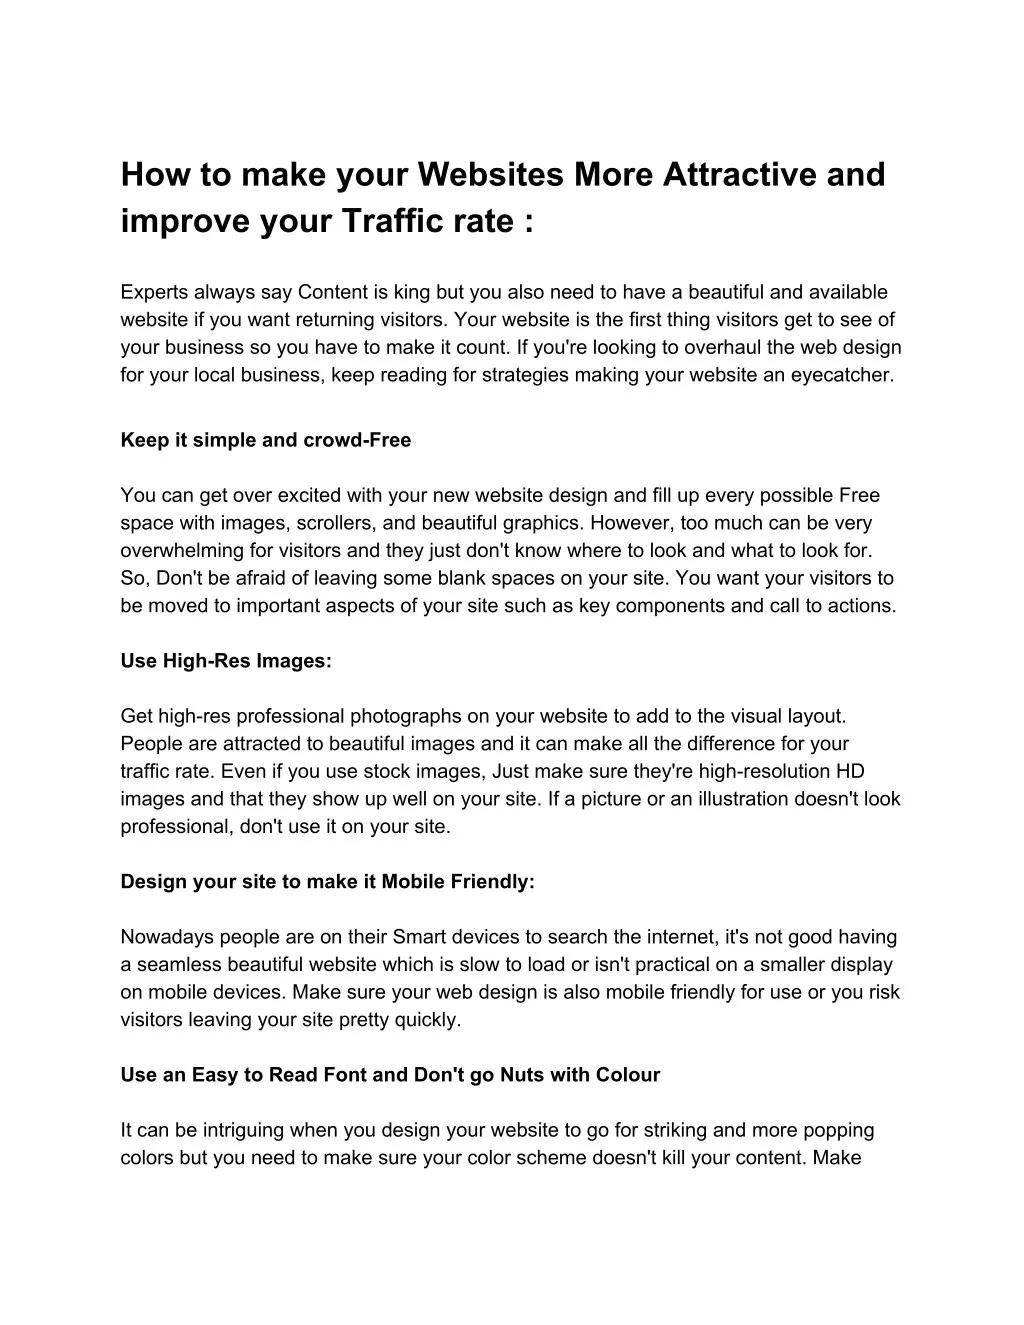 how to make your websites more attractive